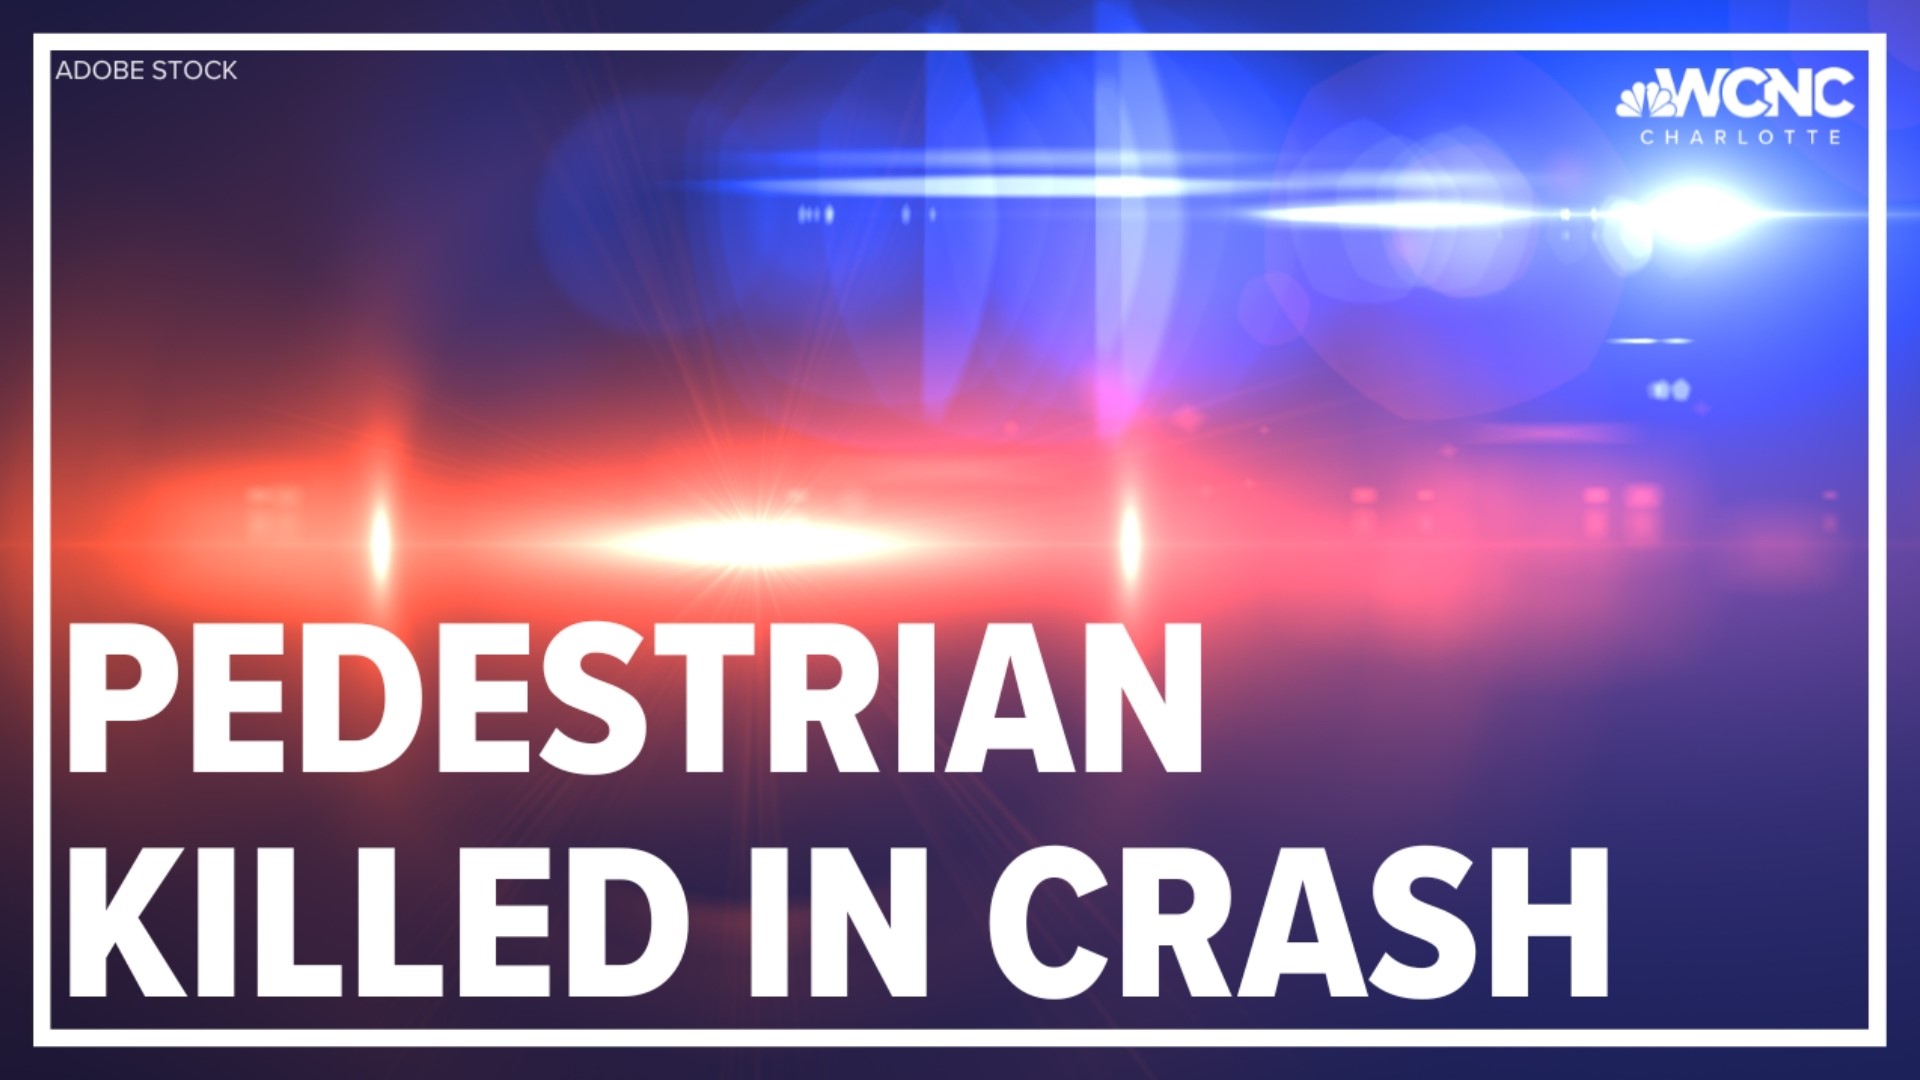 The Charlotte-Mecklenburg Police Department said a pedestrian died after being hit by a car Friday night.